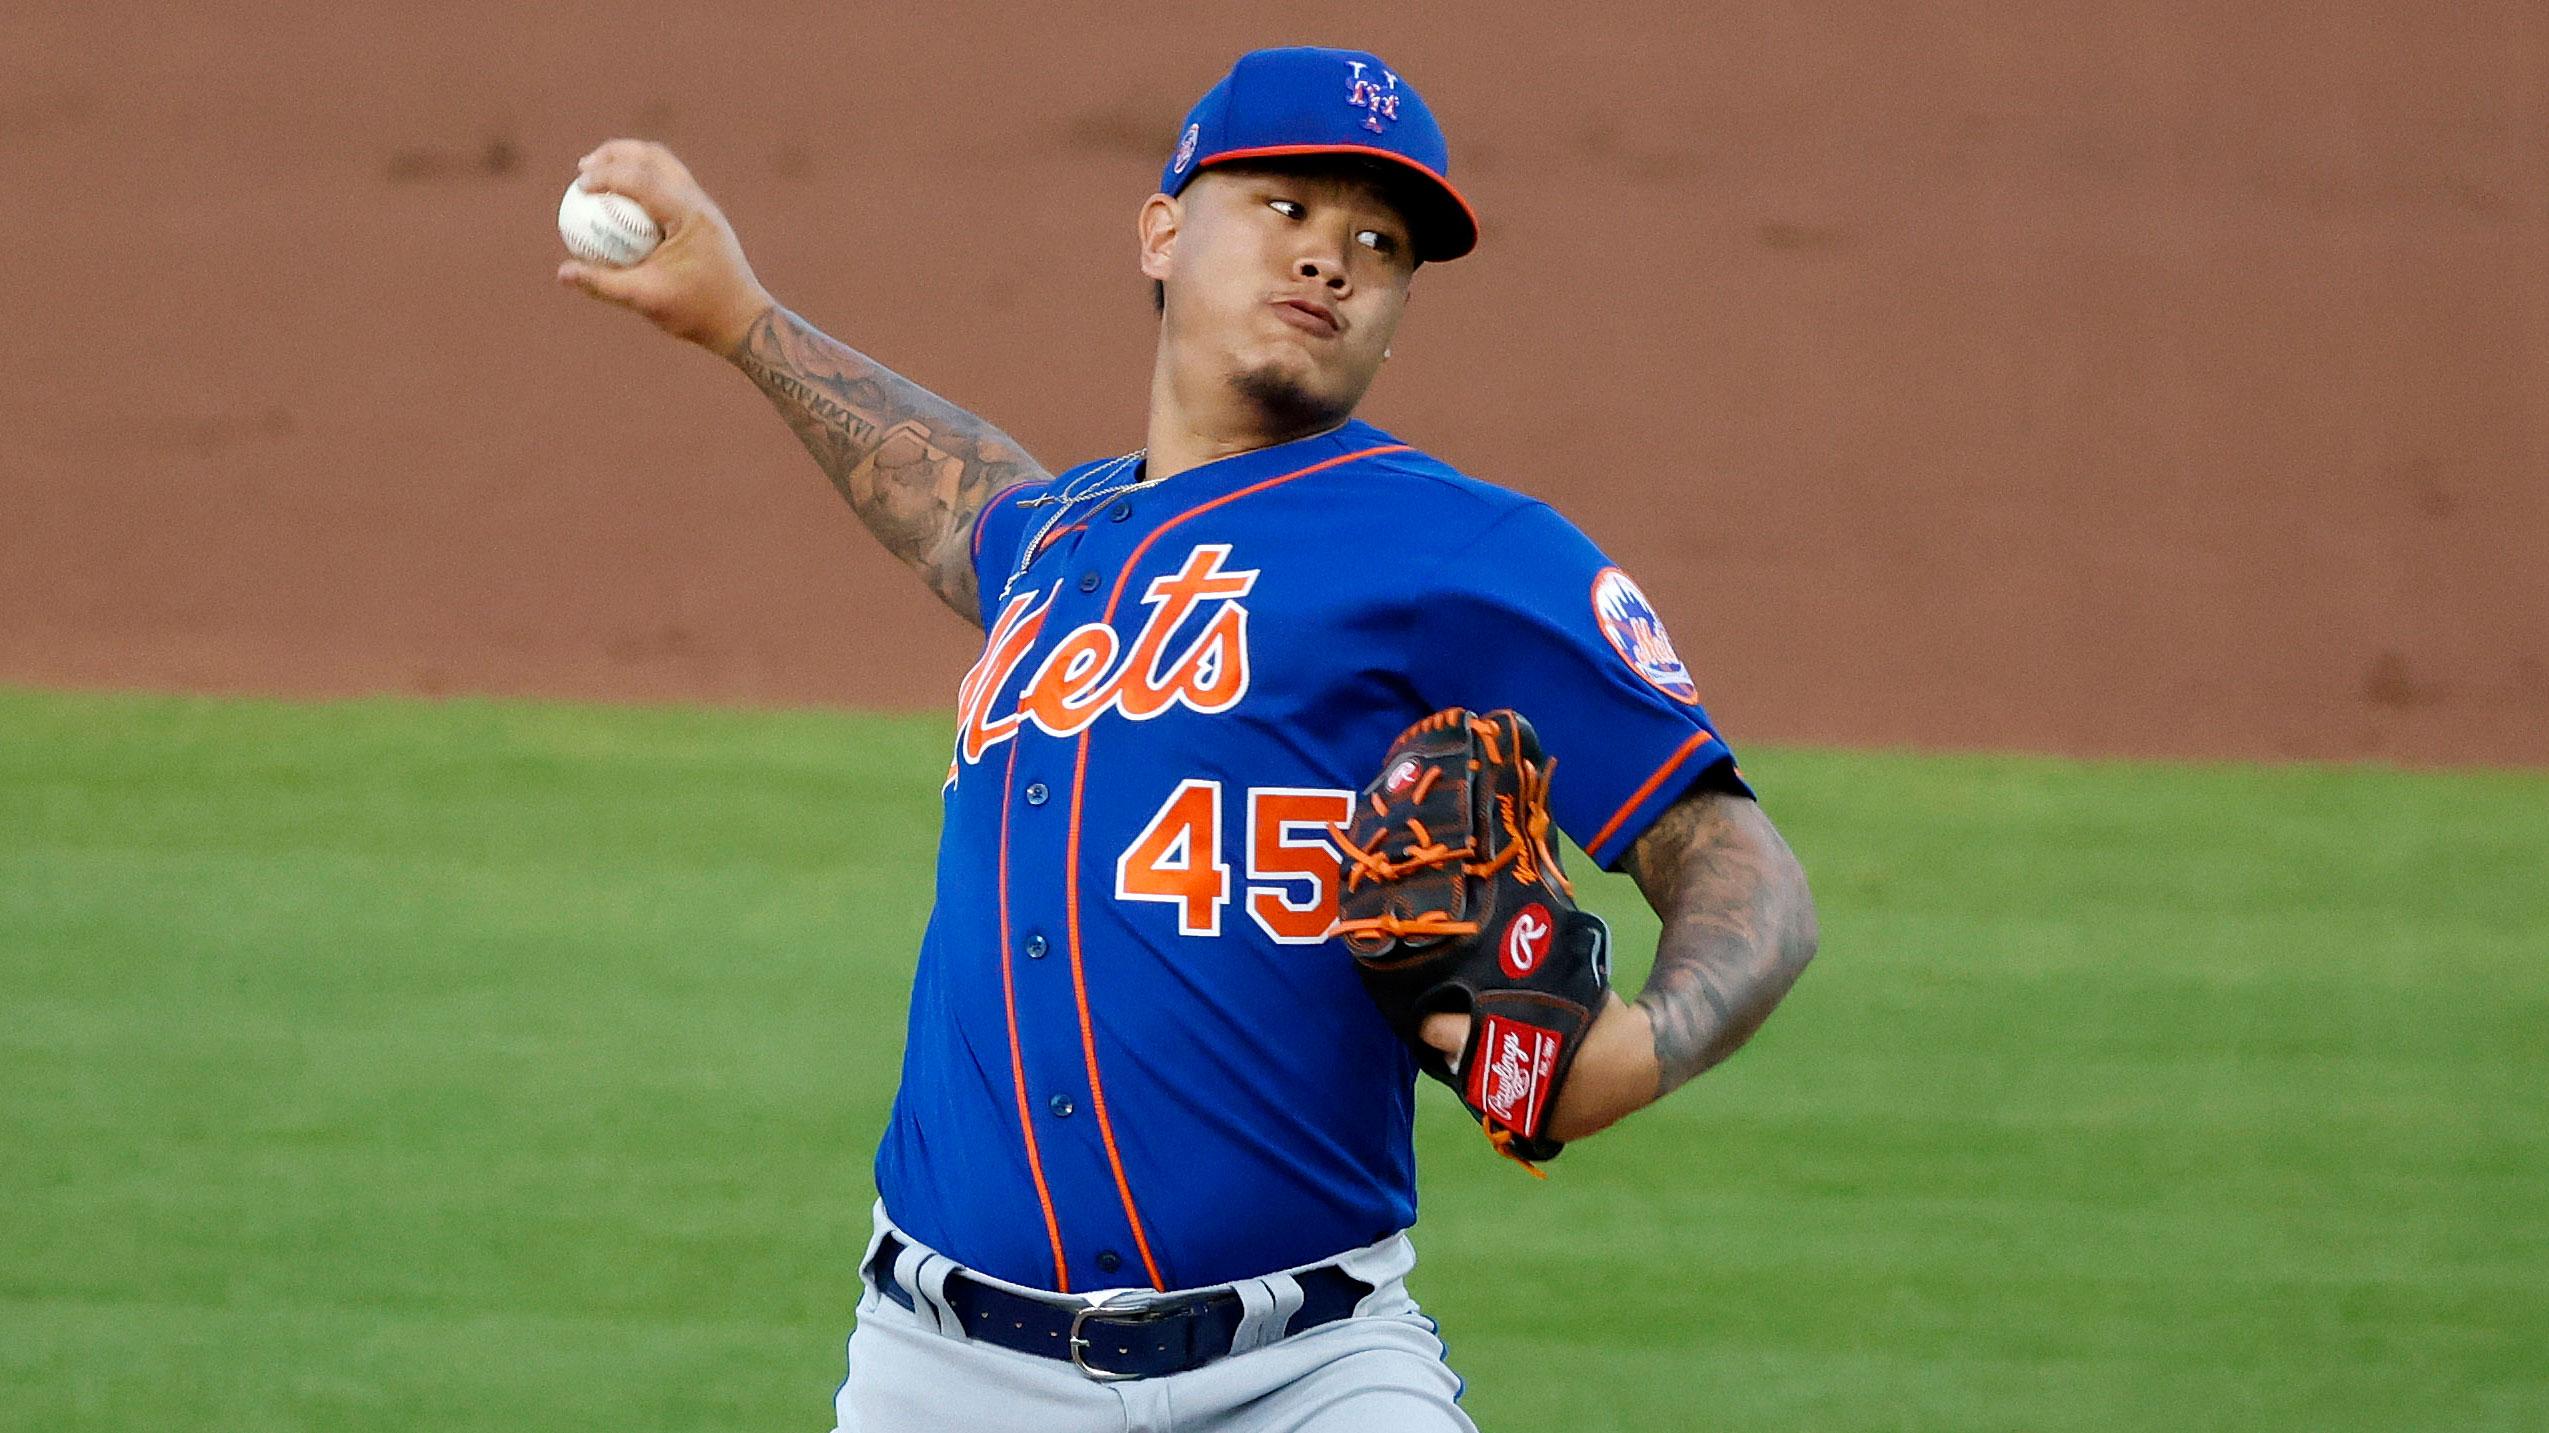 Mar 13, 2021; West Palm Beach, Florida, USA; New York Mets pitcher Jordan Yamamoto (45) throws against the Washington Nationals during the first inning of a spring training game at FITTEAM Ballpark of the Palm Beaches. / Rhona Wise-USA TODAY Sports